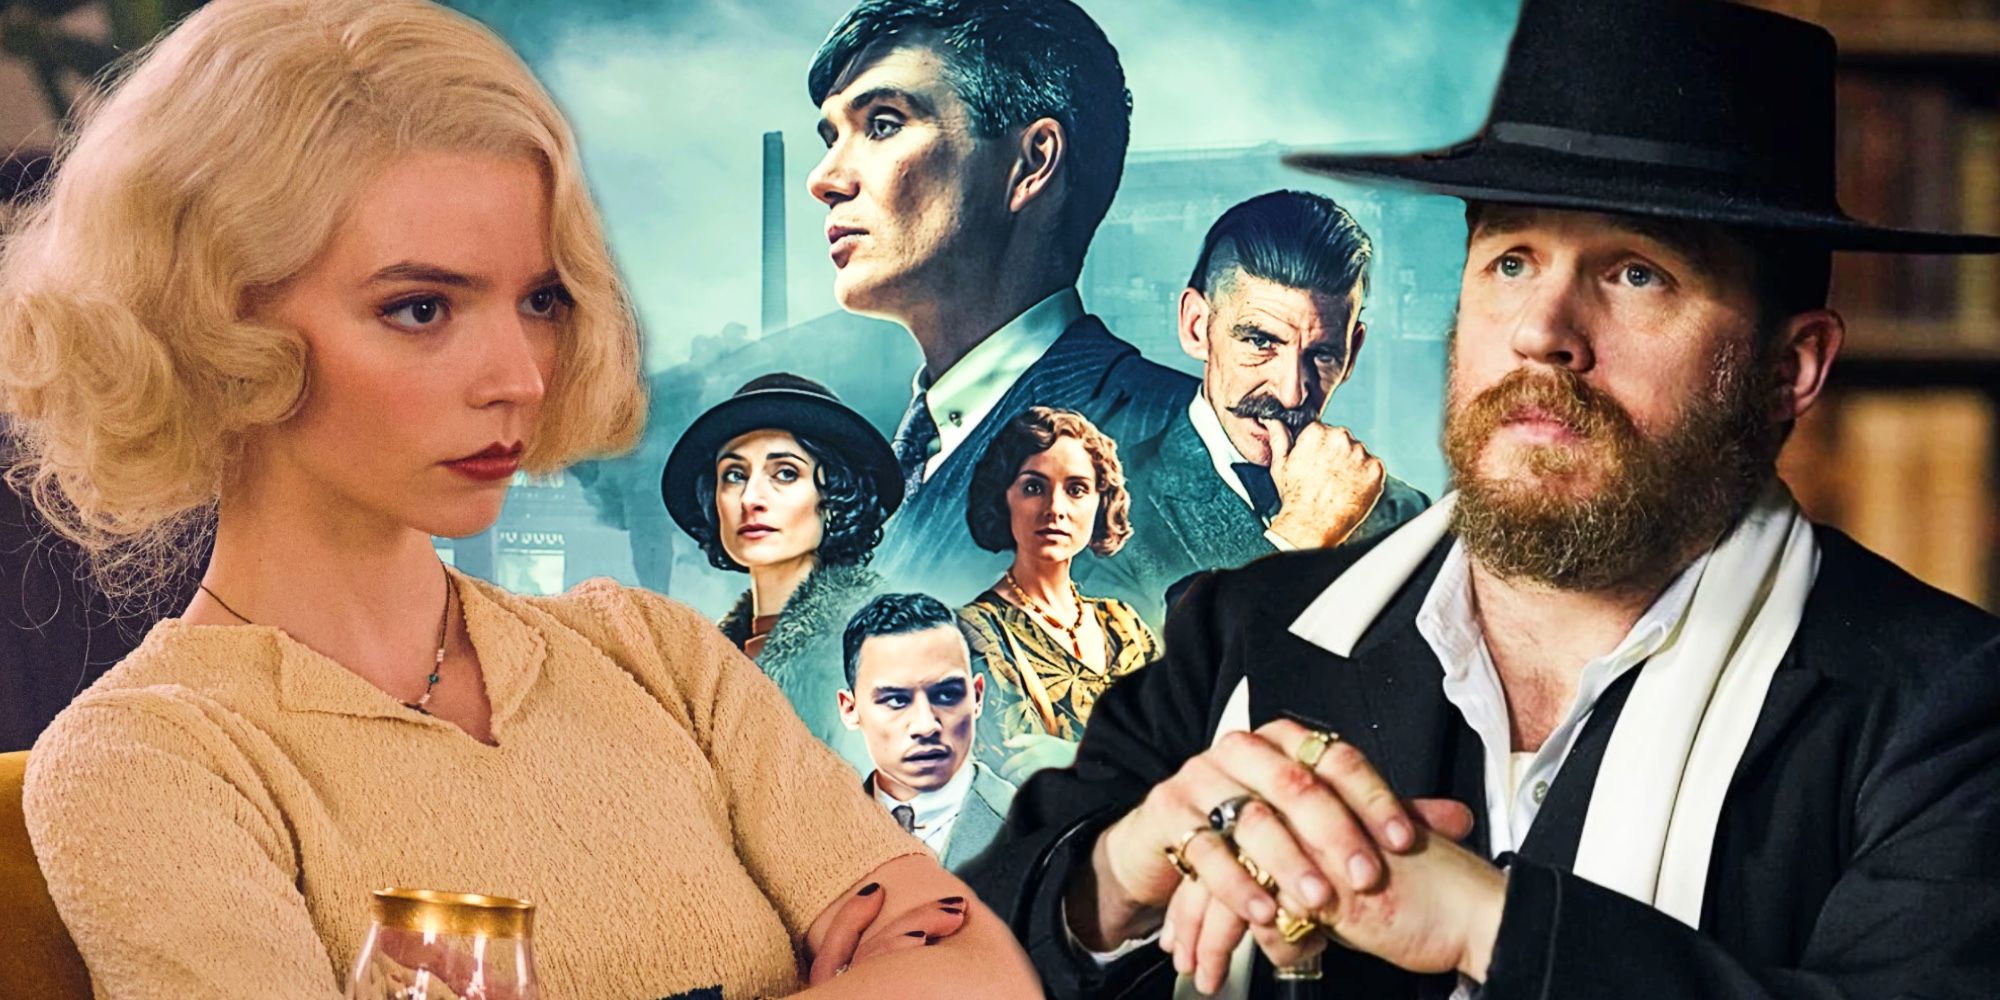 Why Peaky Blinders’ Spinoffs Shouldn’t Be Sequels